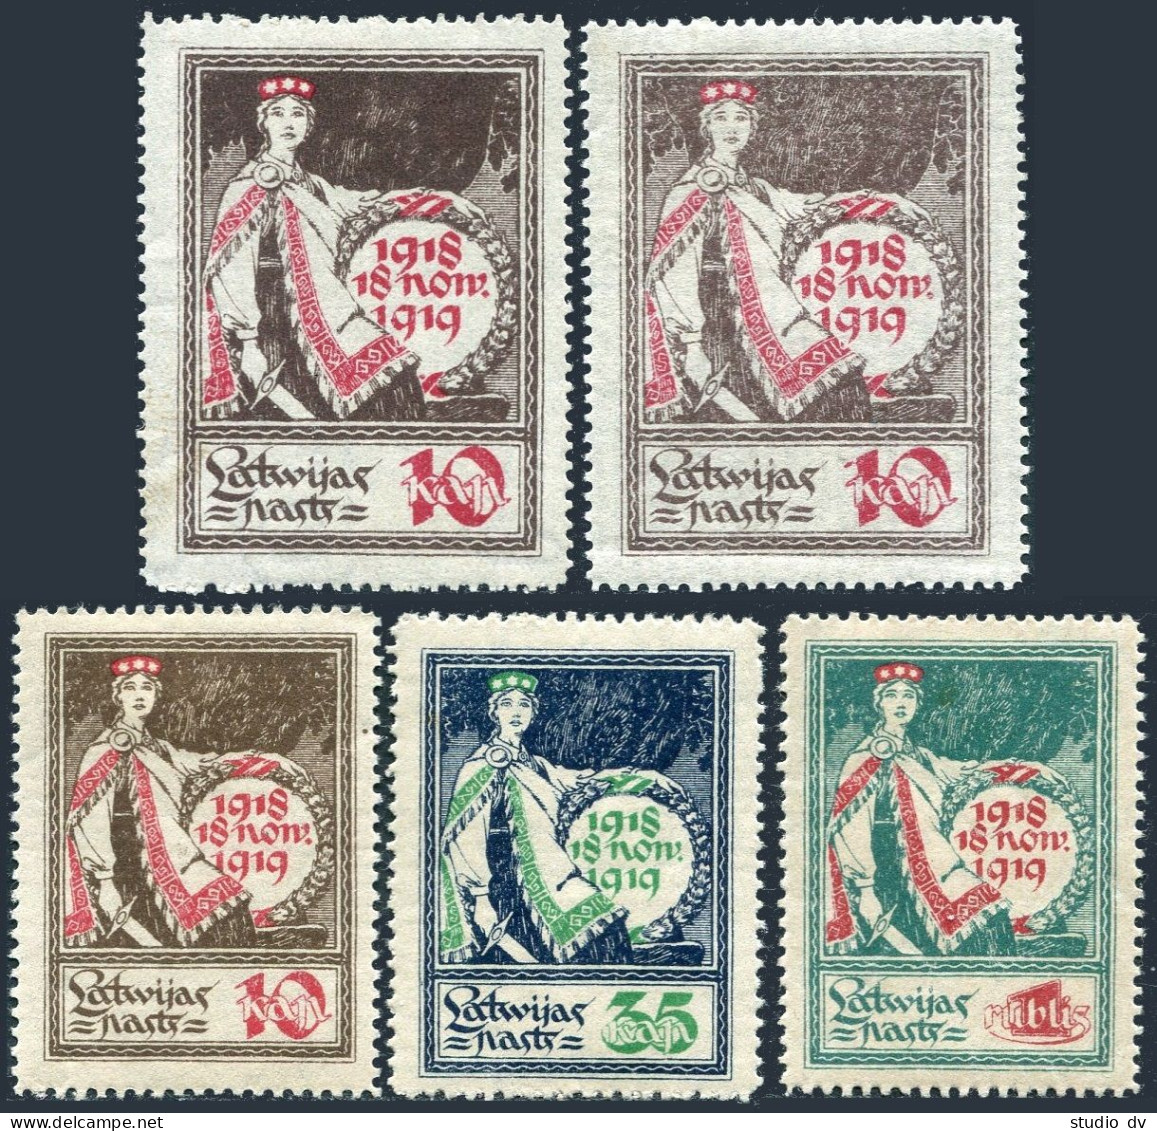 Latvia 59-63, MNH. Michel 32 X-y,33-35. Allegory-One Year Independence, 1919. - Latvia